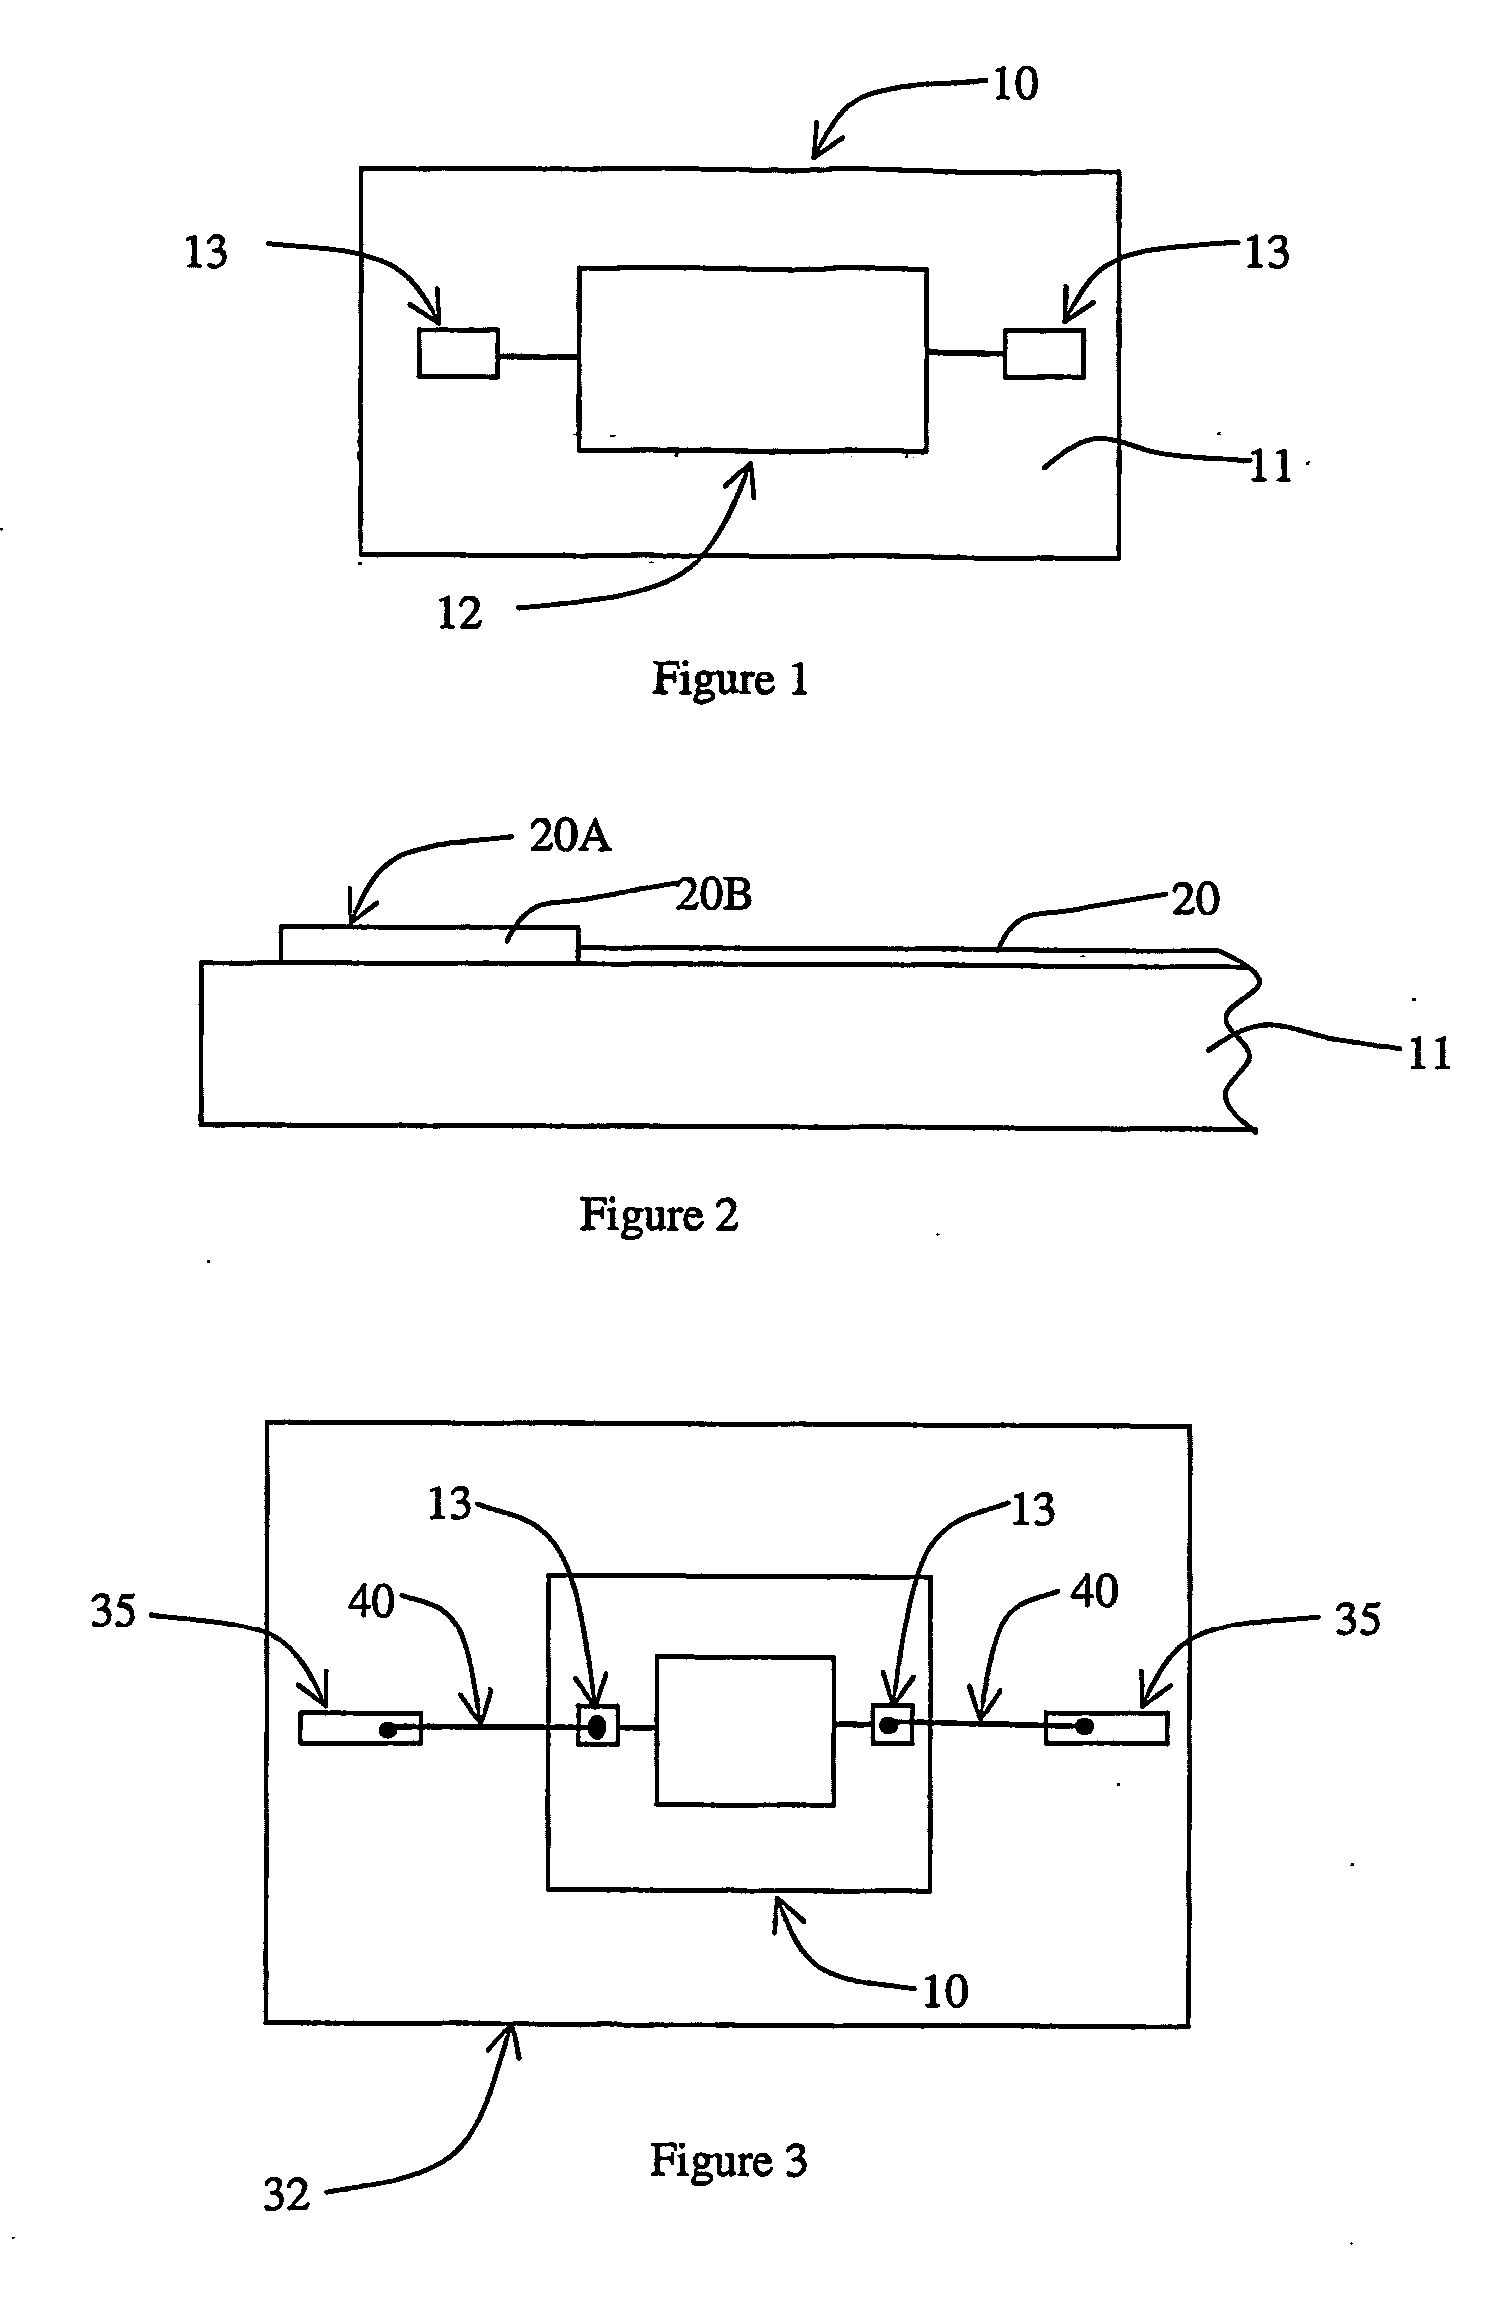 Interconnect apparatus and methods